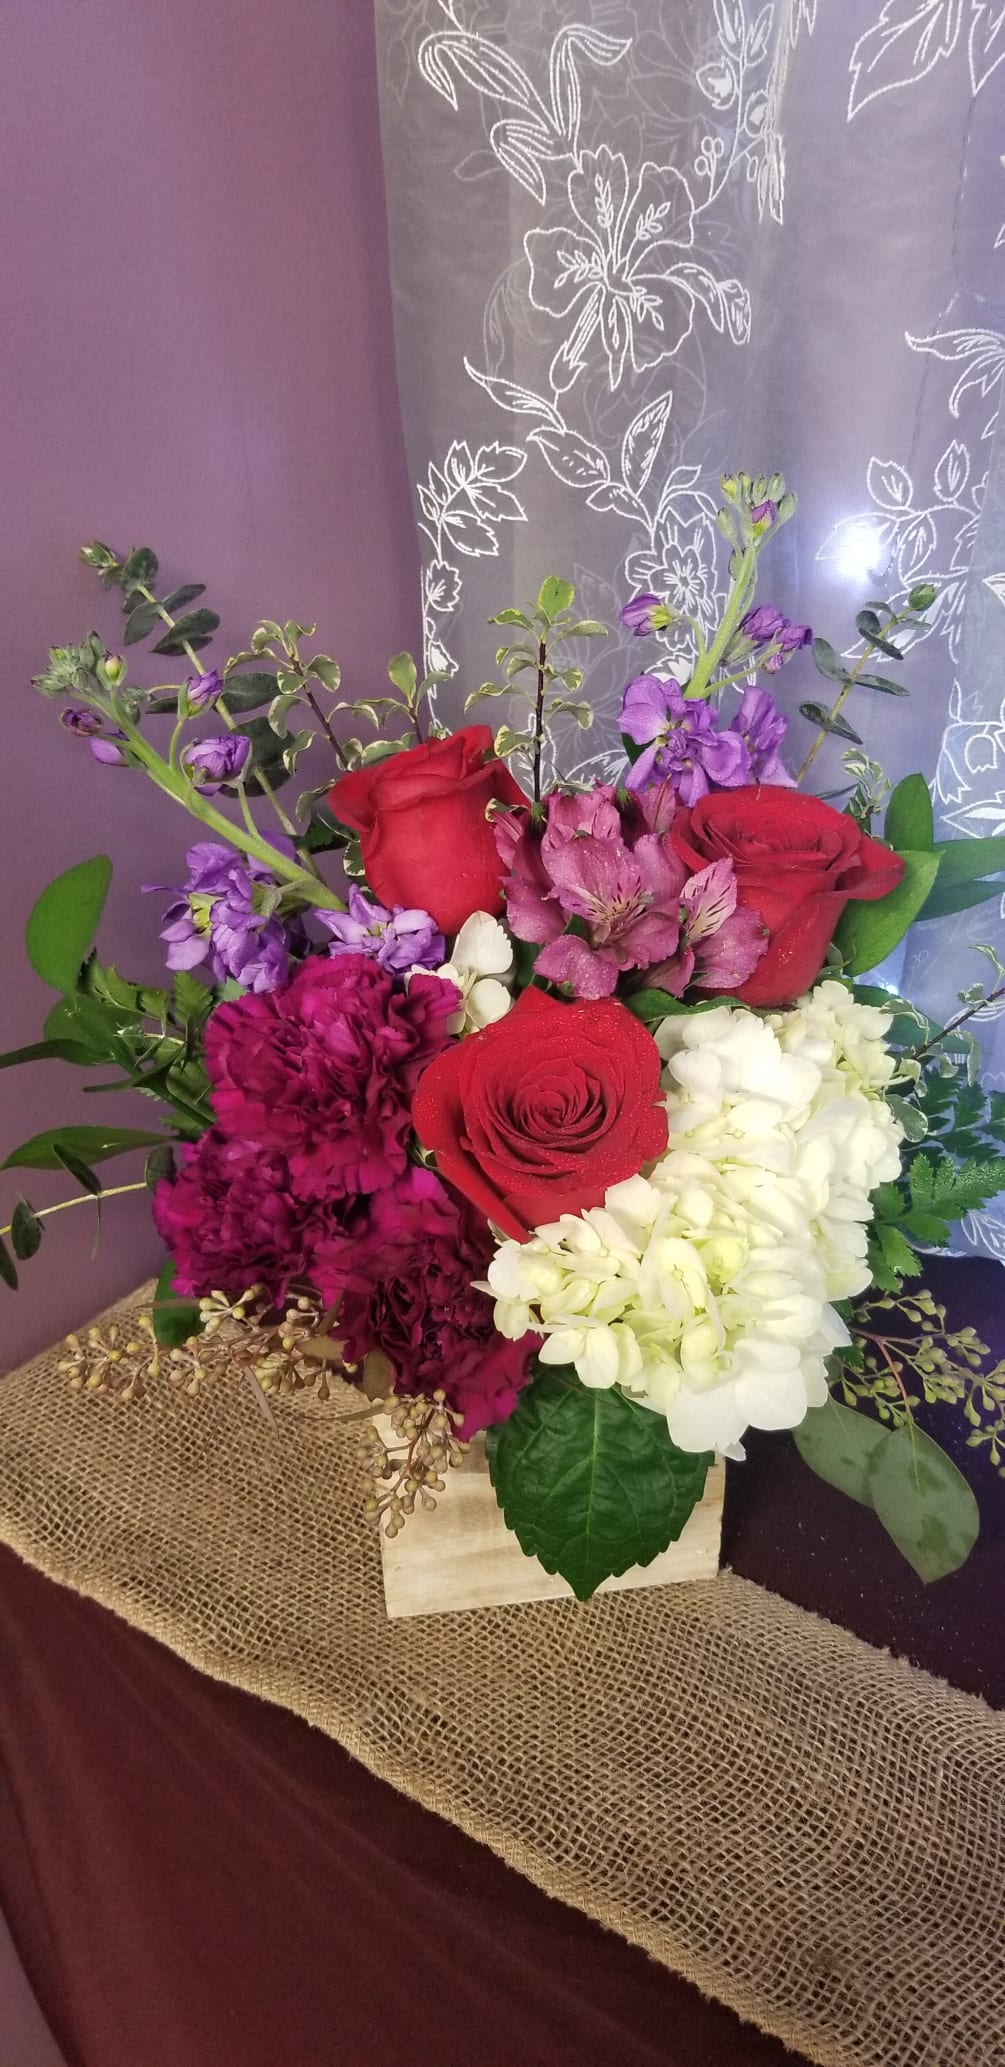 Designed in a wooden cube with a hydrangea roses, stock, alstroemeria, and